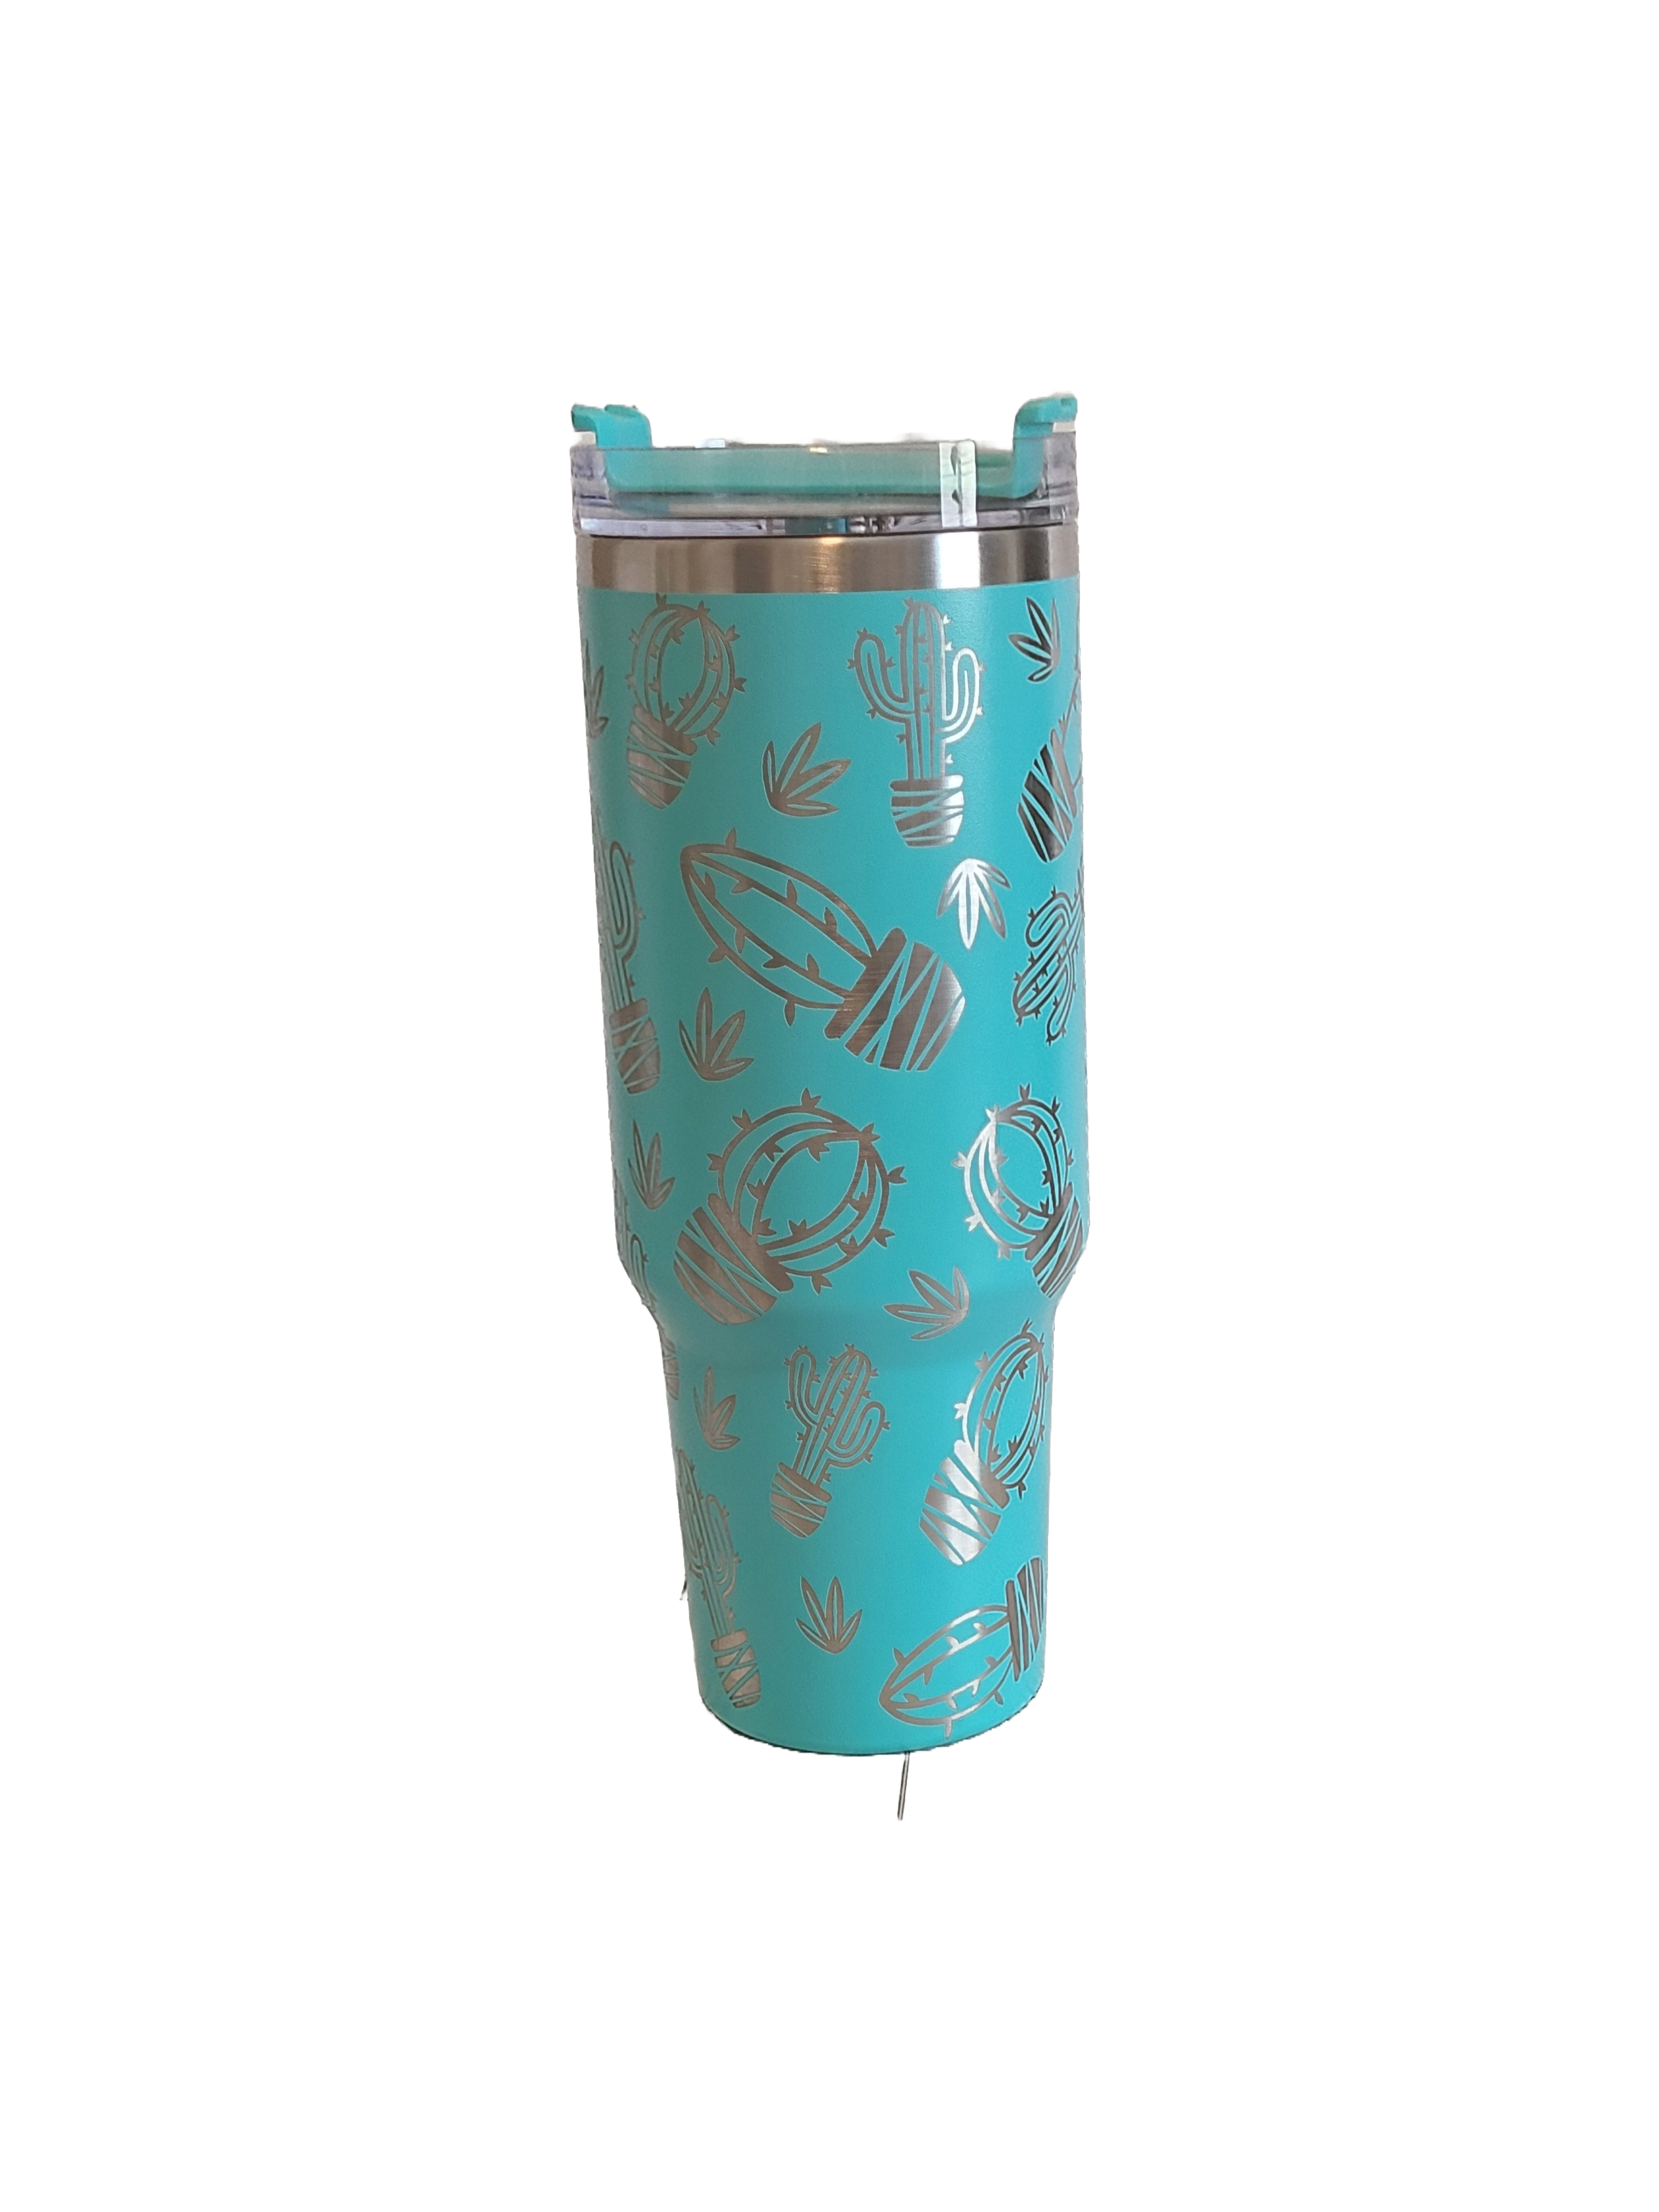 40 oz Stainless Steel Tumbler with Handle-"Cactus Designs"